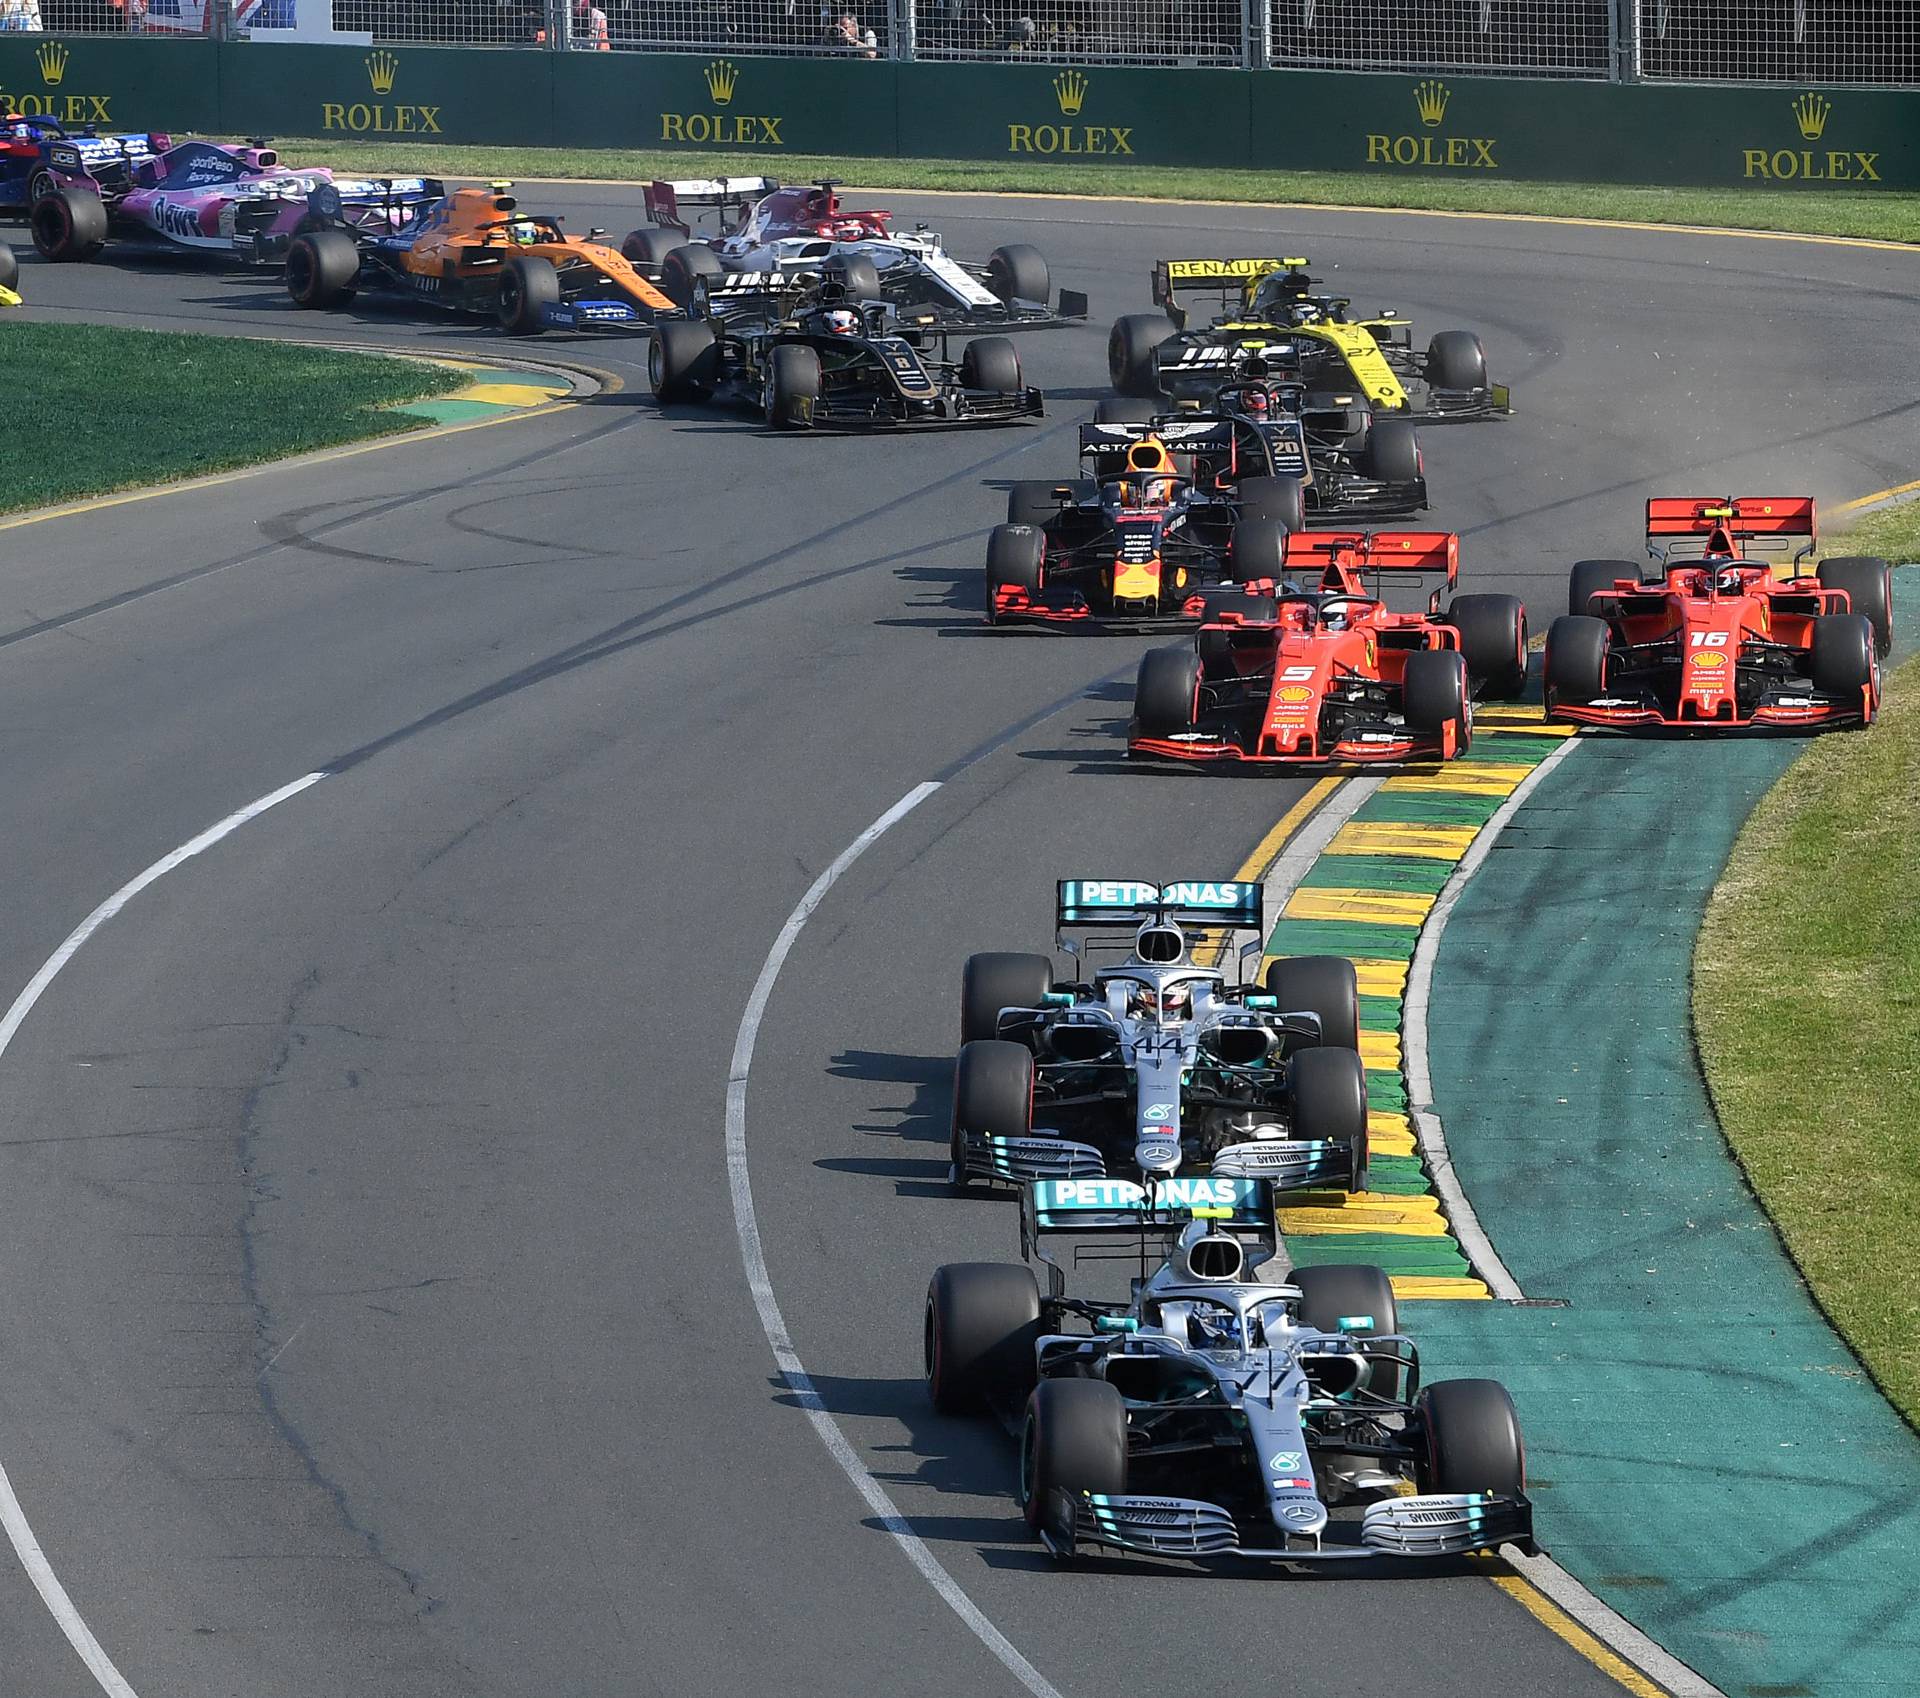 Mercedes' Valtteri Bottas leads the field through turn two during the the Formula One F1 Australian Grand Prix at the Albert Park Grand Prix Circuit in Melbourne